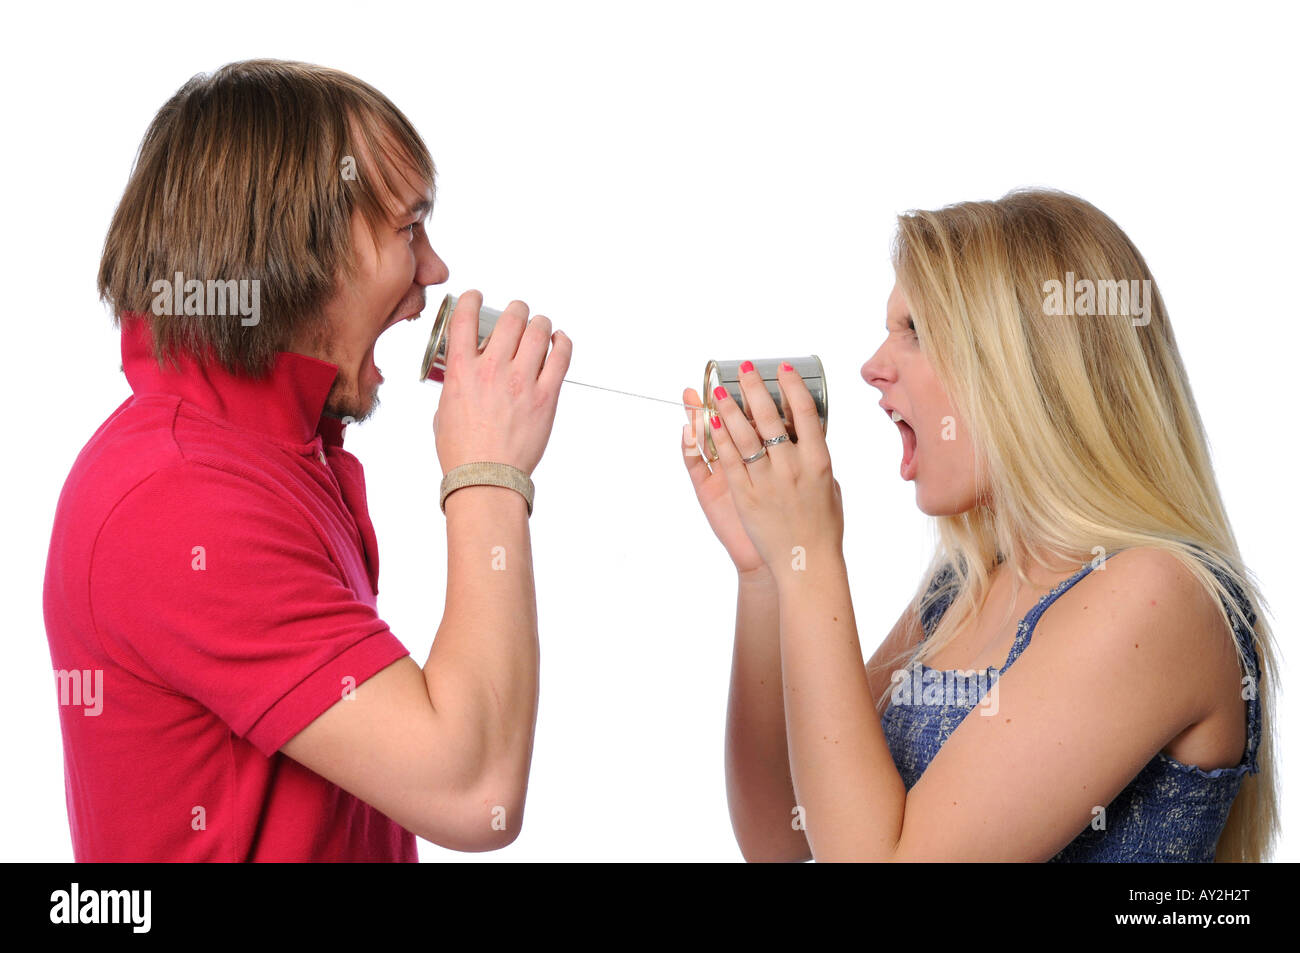 Young couple using tin can phone in an argument Stock Photo